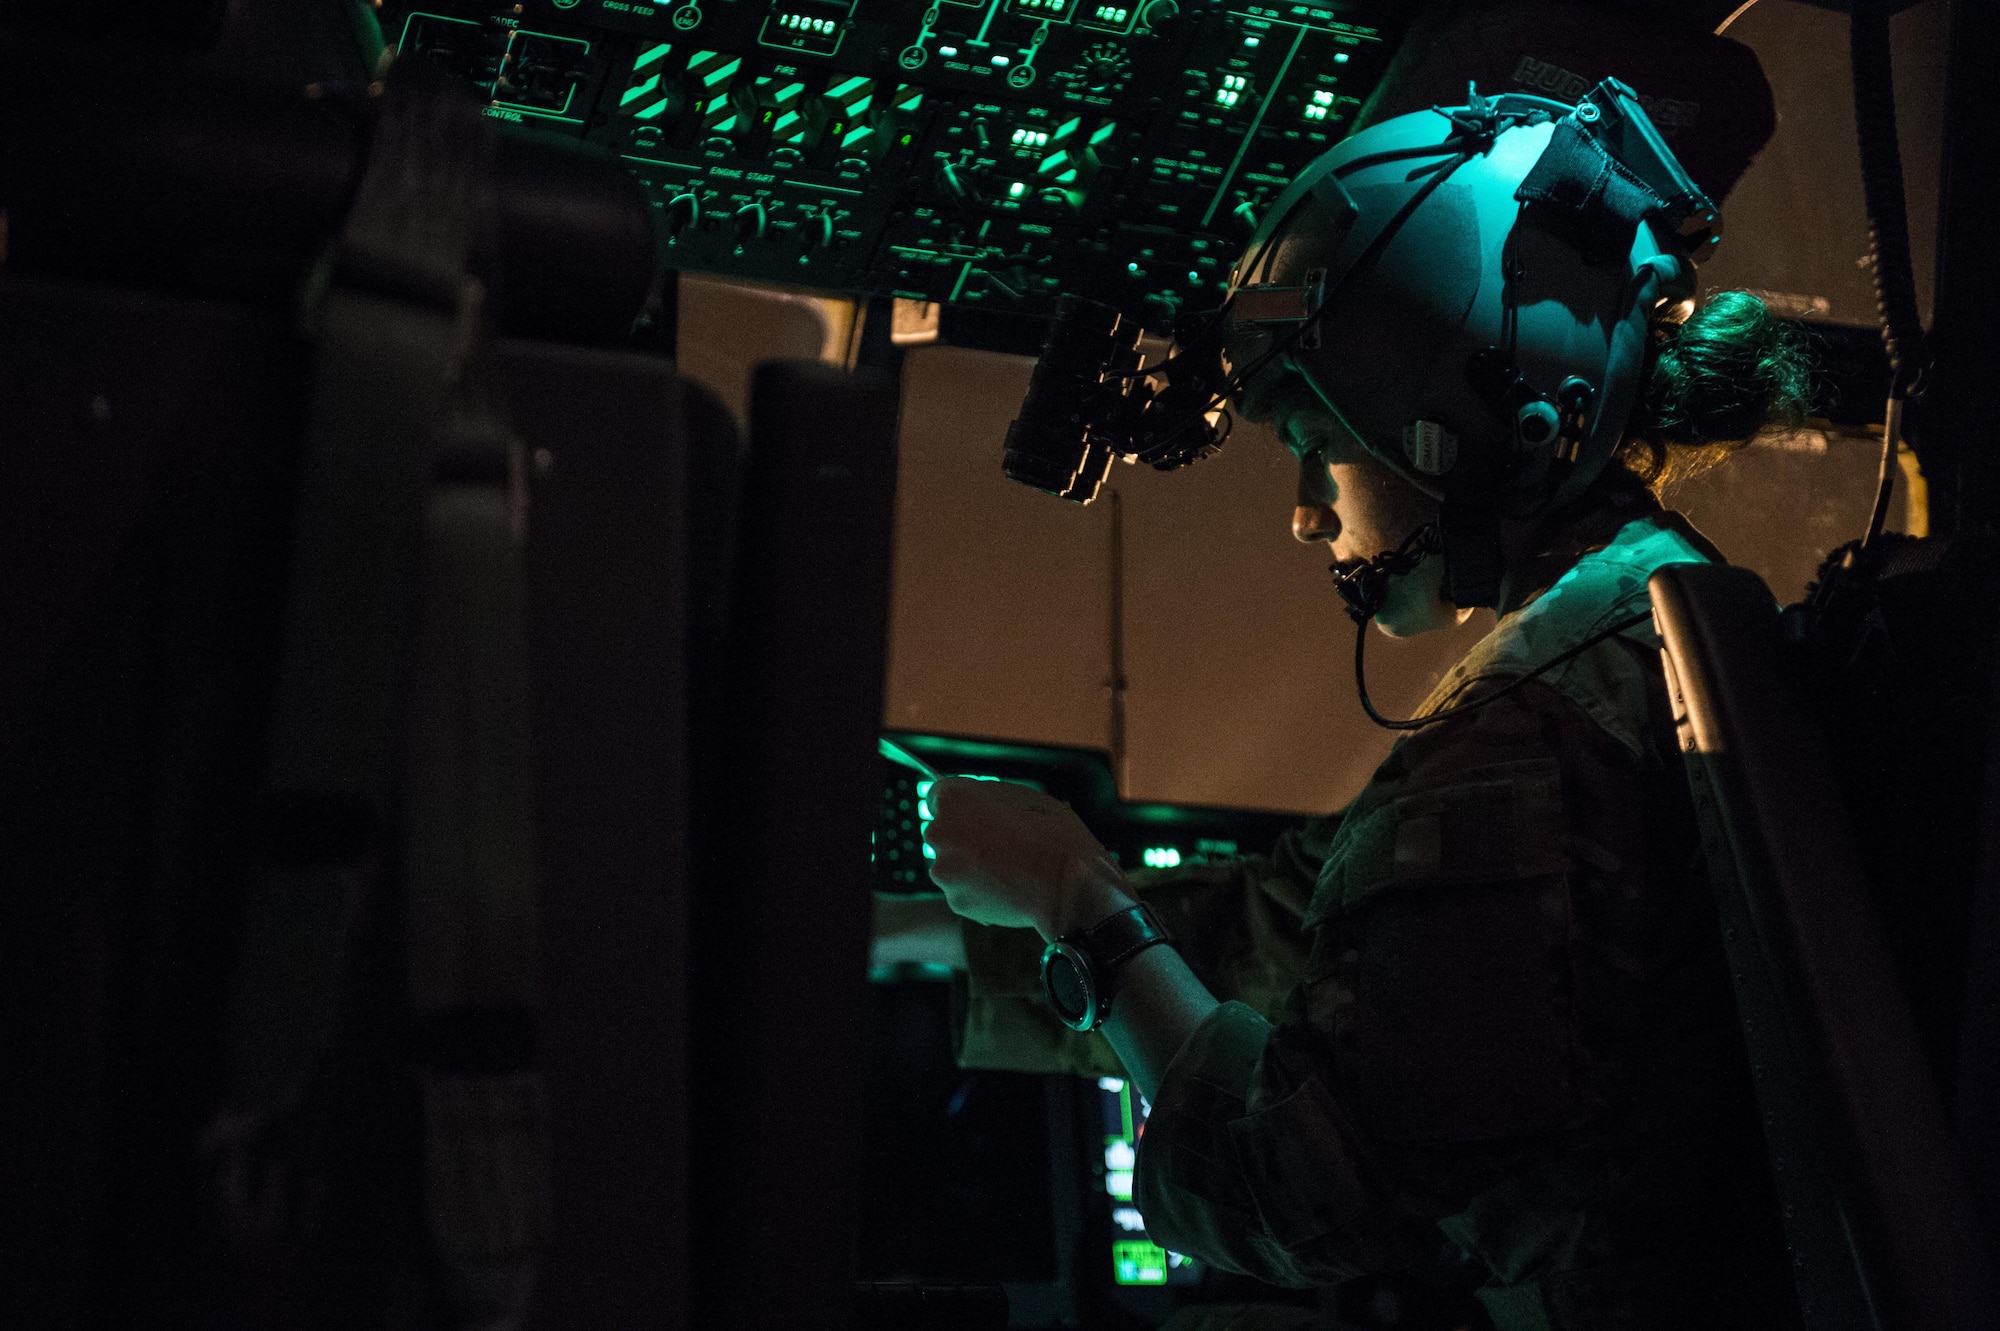 A U.S. Air Force 9th Special Operations Squadron pilot reads through a checklist after a flight on an MC-130J Commmando II during Emerald Warrior 17 at Hurlburt Field, Fla., Feb. 28, 2017. Emerald Warrior is a U.S. Special Operations Command exercise during which joint special operations forces train to respond to various threats across the spectrum of conflict. (U.S. Air Force photo by Staff Sgt. Corey Hook)